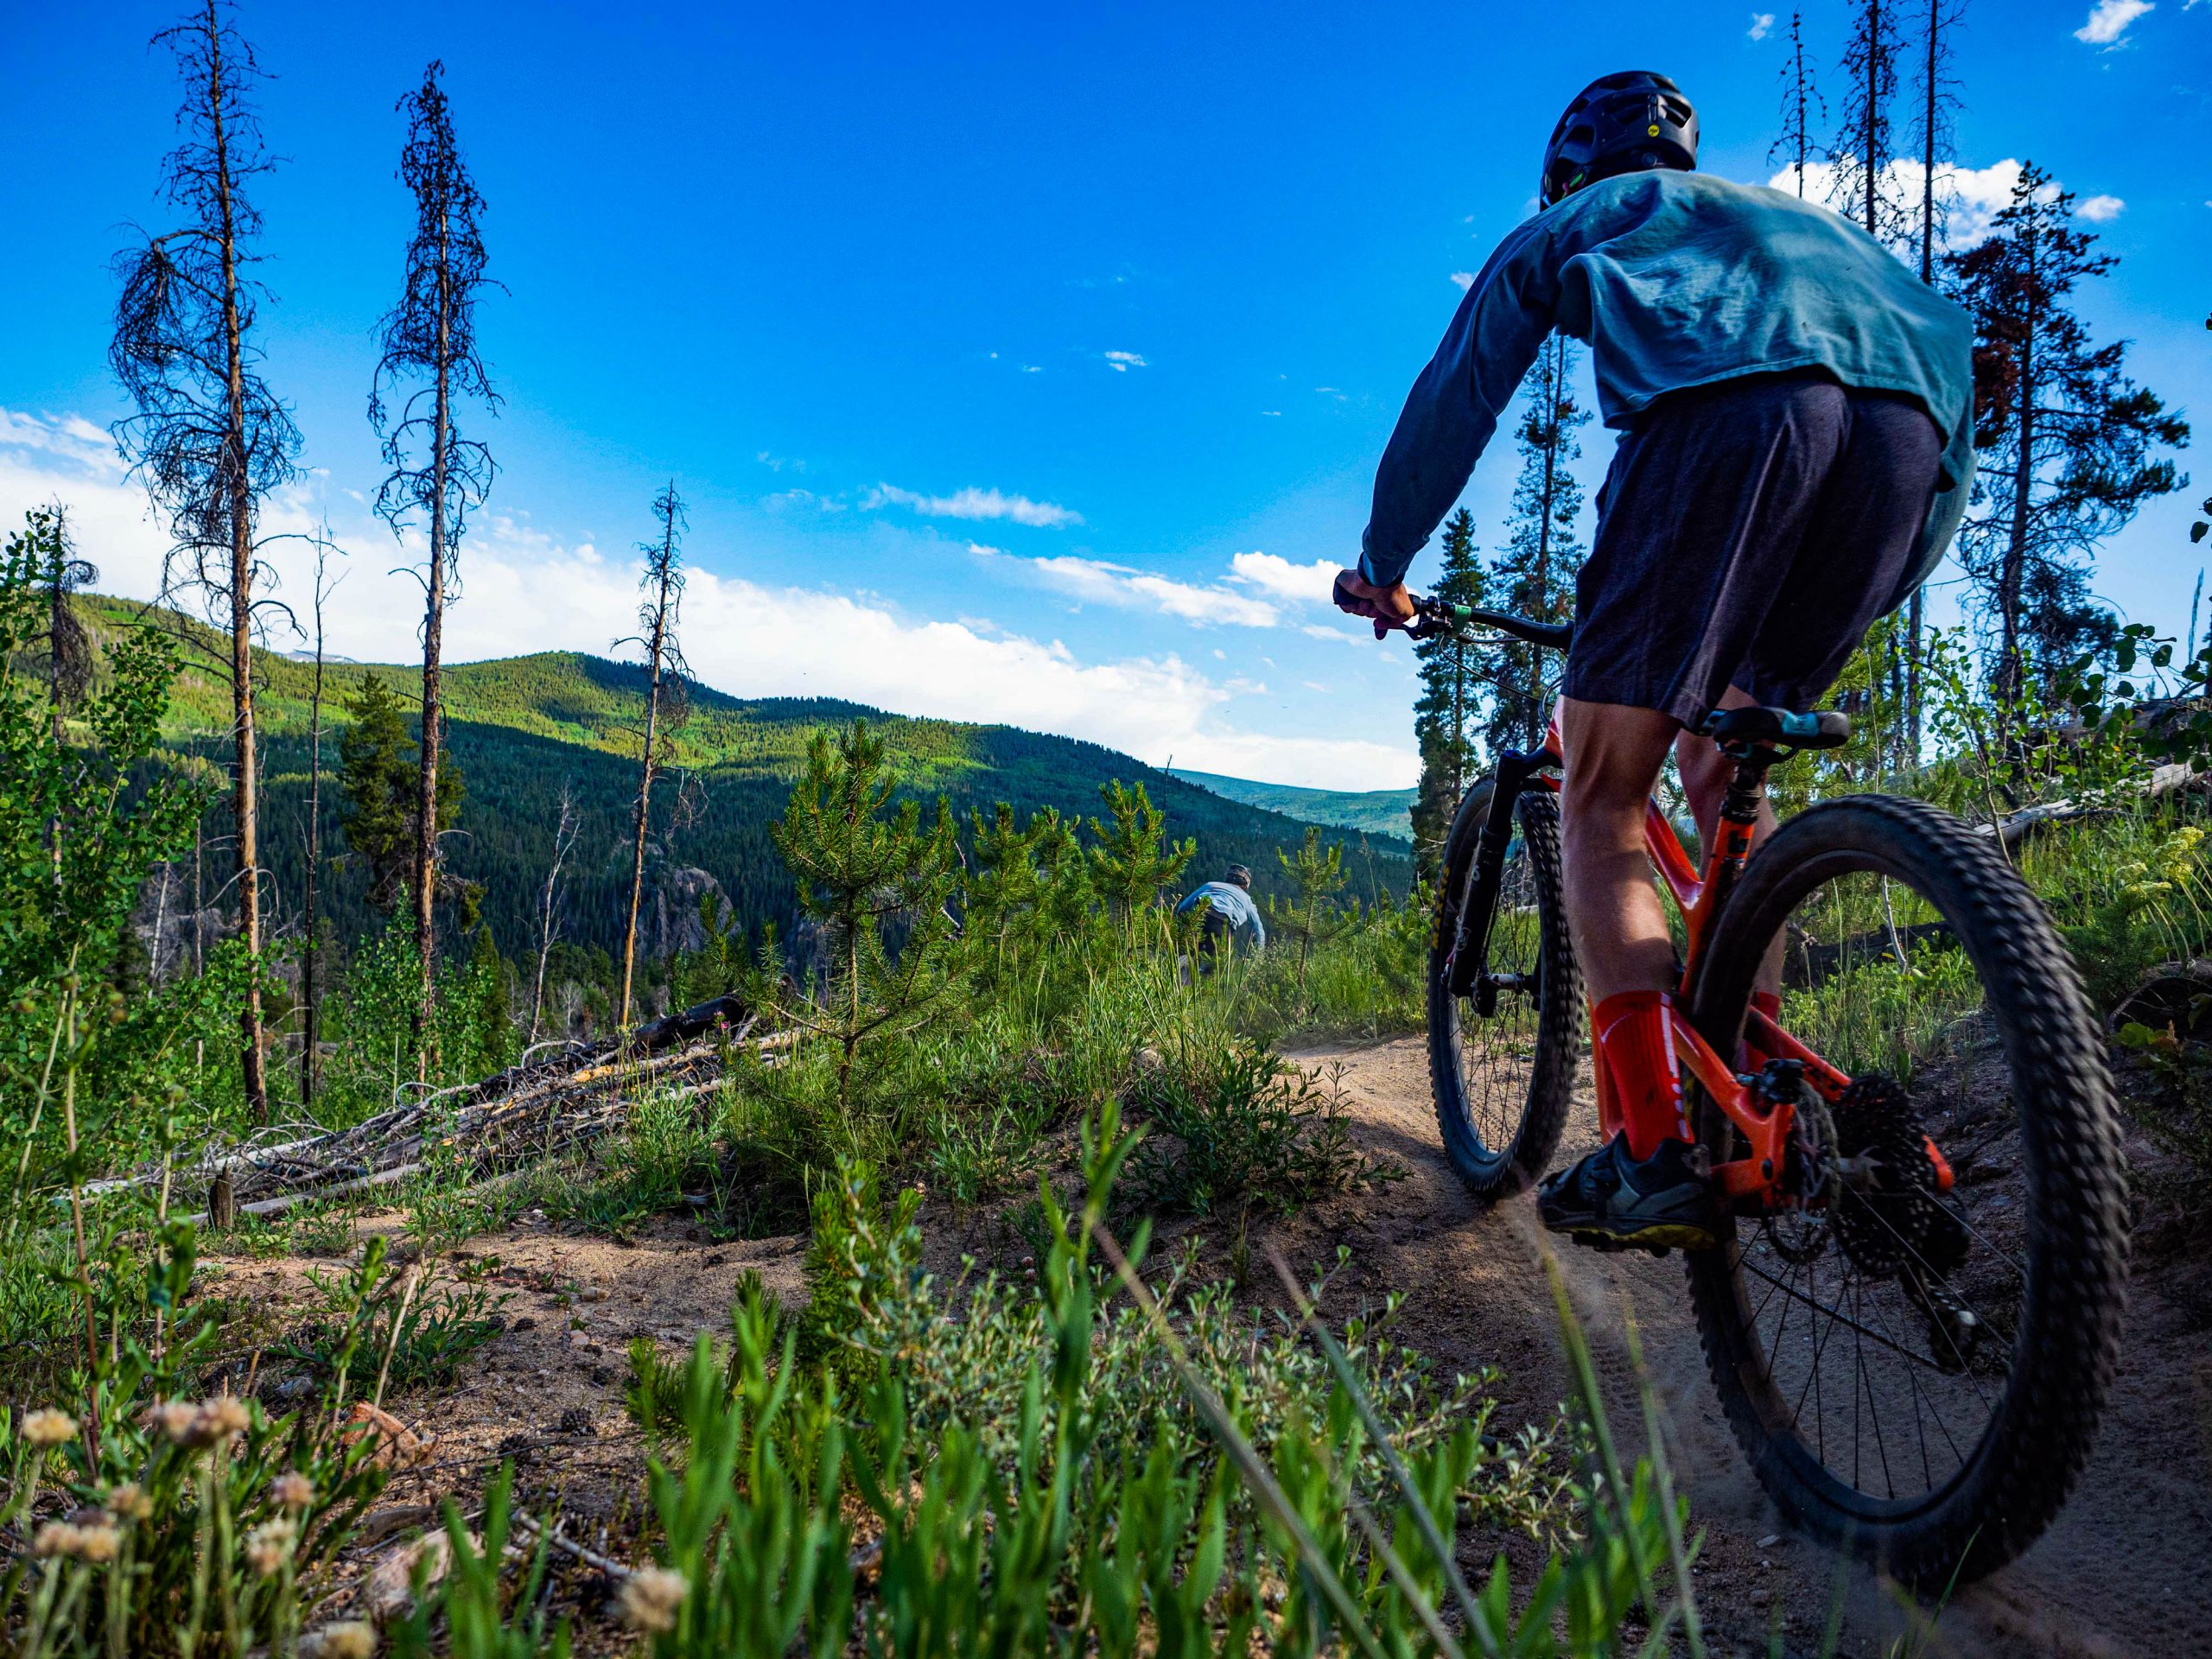 A mountain biker tops out on a ridge overlooking lush green mountains.